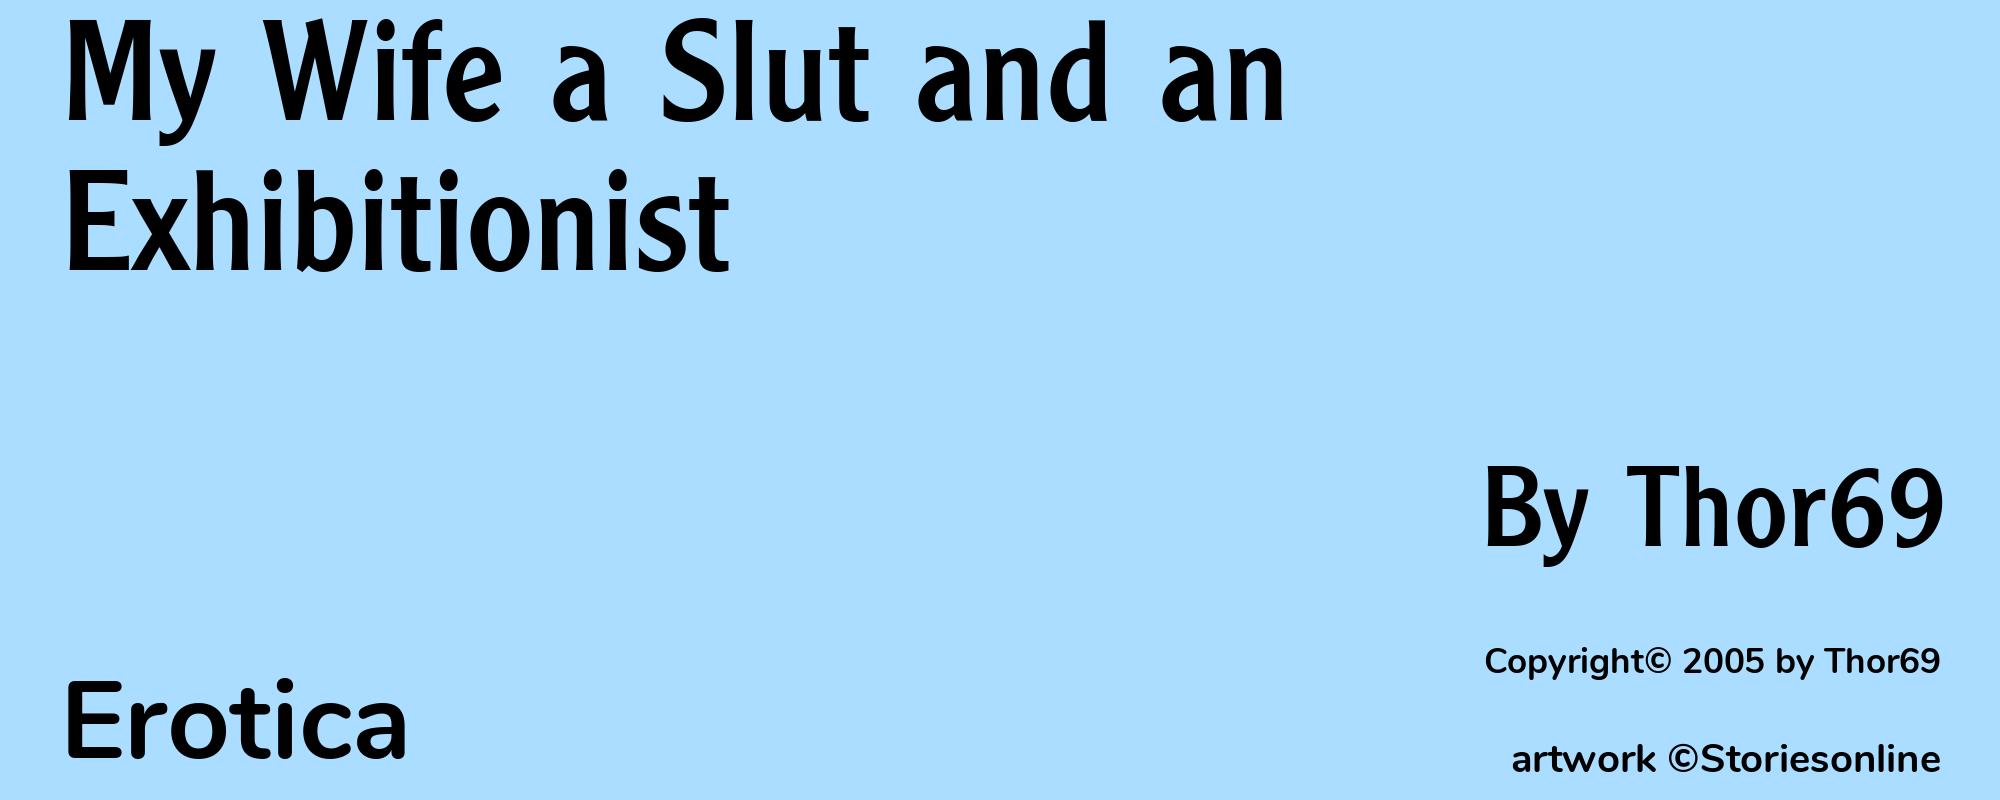 My Wife a Slut and an Exhibitionist - Cover